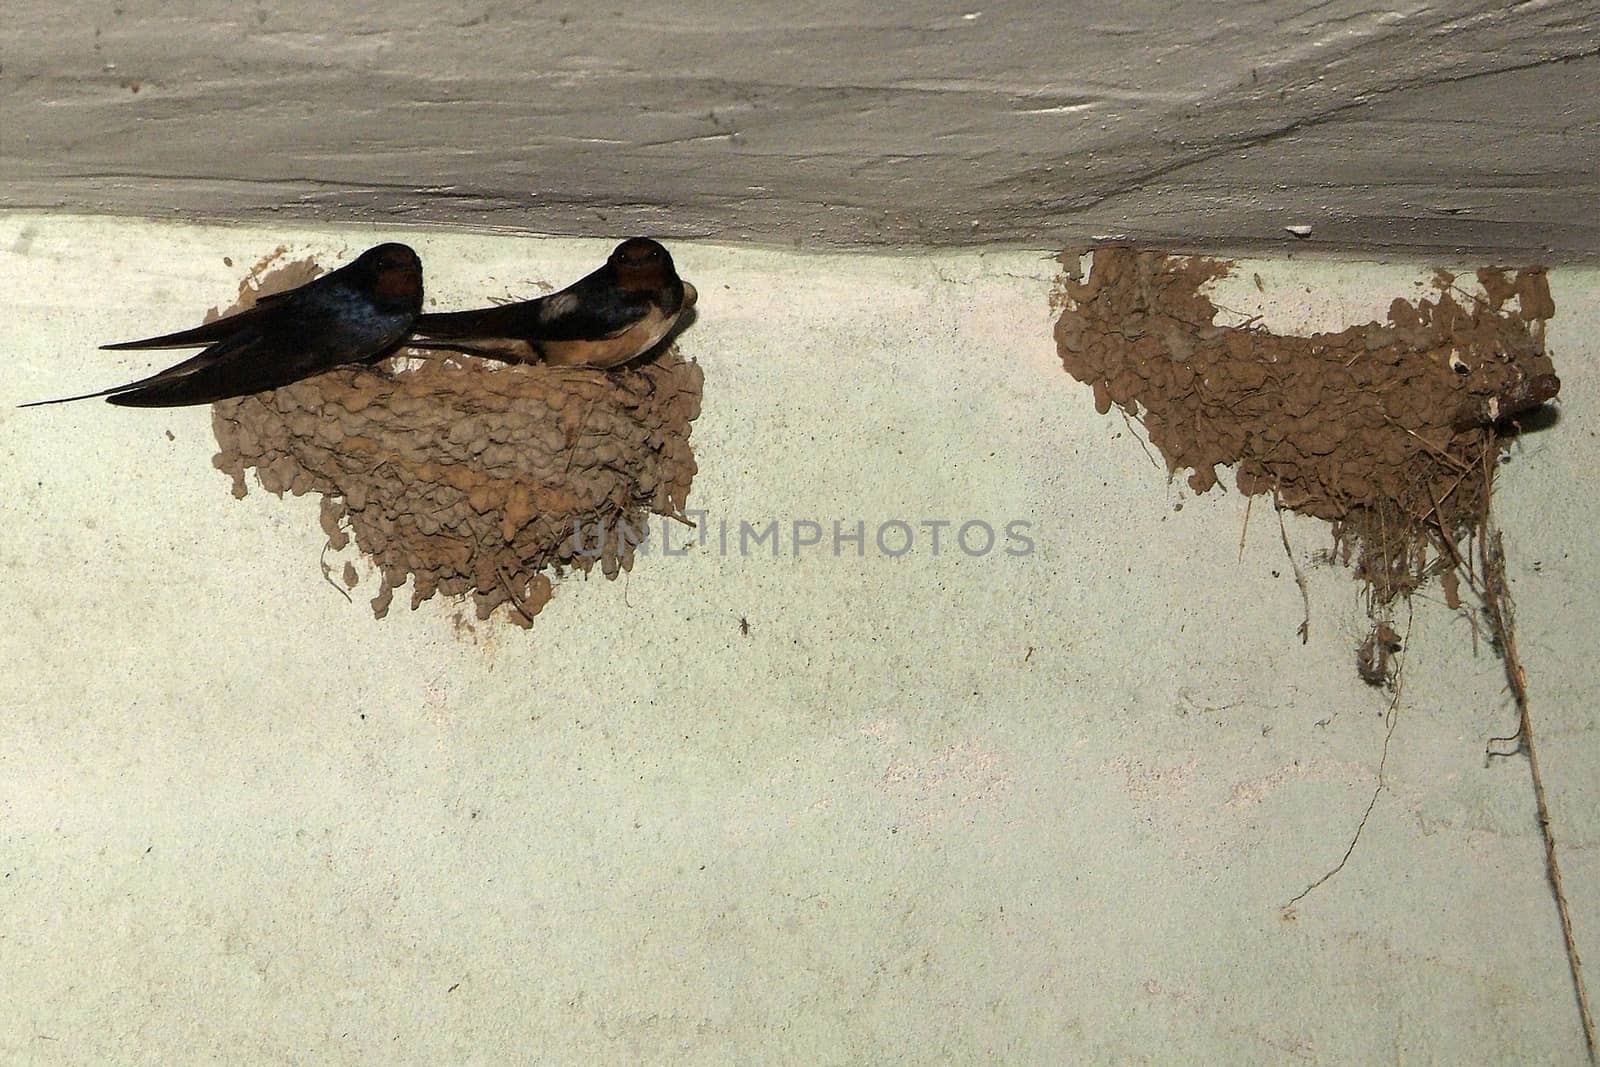 Birds and animals in wildlife. The swallow feeds the baby birds  by romeocharly